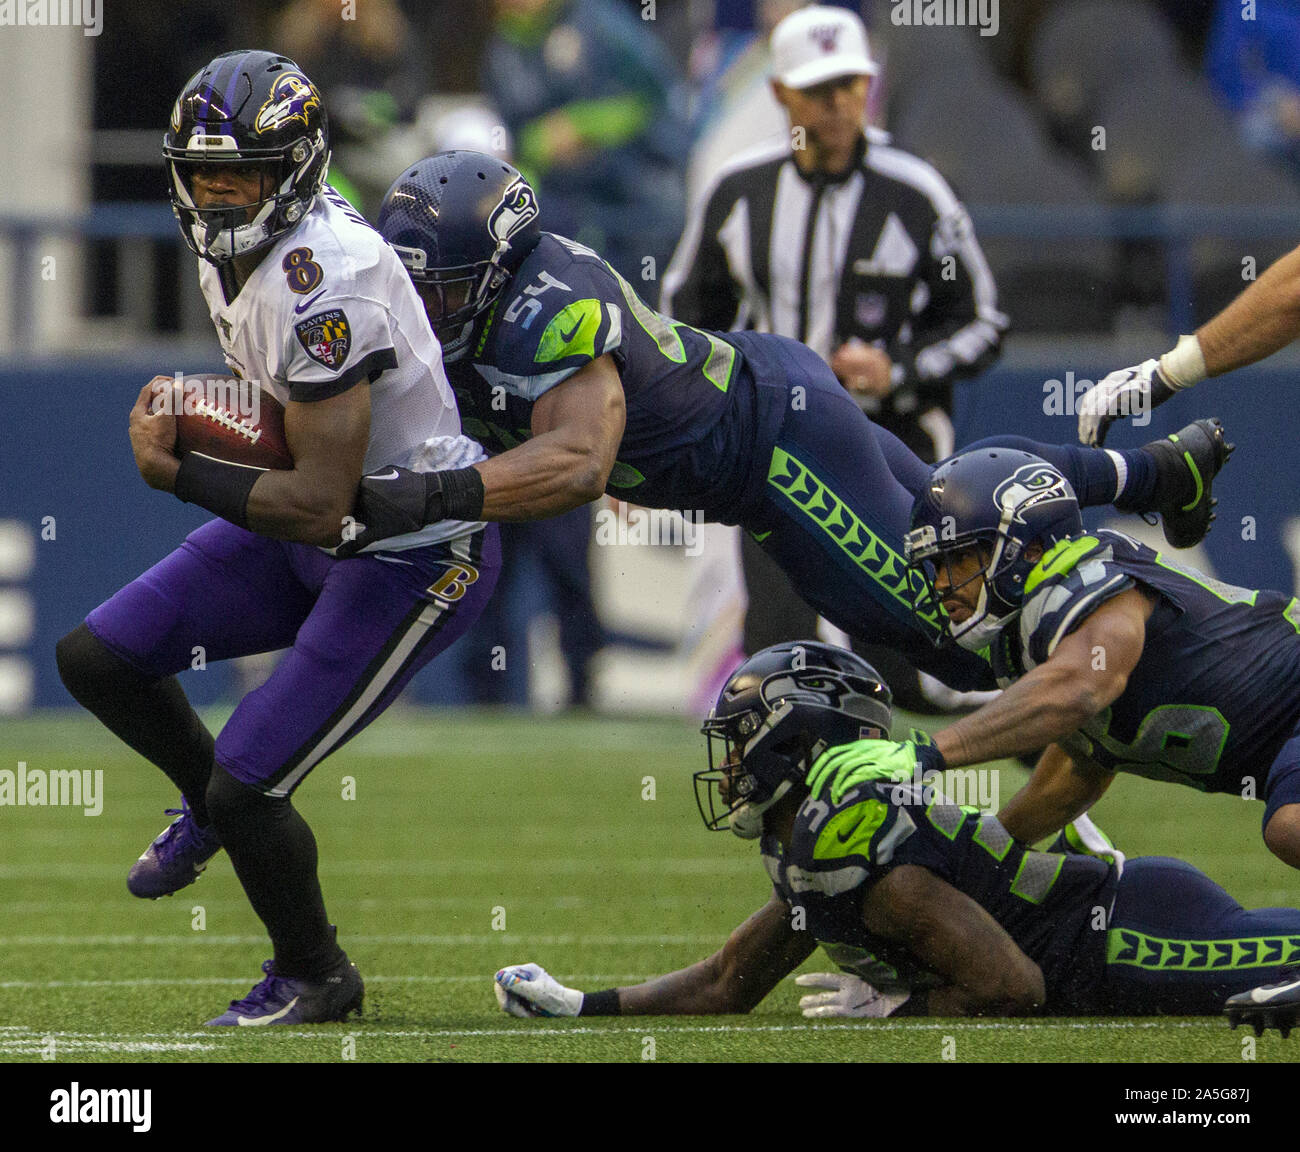 Seattle, United States. 20th Oct, 2019. Baltimore Ravens quarterback Lamar Jackson (8) breaks the attempted tackle by Seattle Seahawks middle linebacker Bobby Wagner (54) for an 8-yard gain during the fourth quarter at CenturyLink Field on Sunday, October 20, 2019 in Seattle, Washington. Jackson led the Ravens Ravens to a 30-16 victory over the Seahawks. Photo by Jim Bryant/UPI Credit: UPI/Alamy Live News Stock Photo